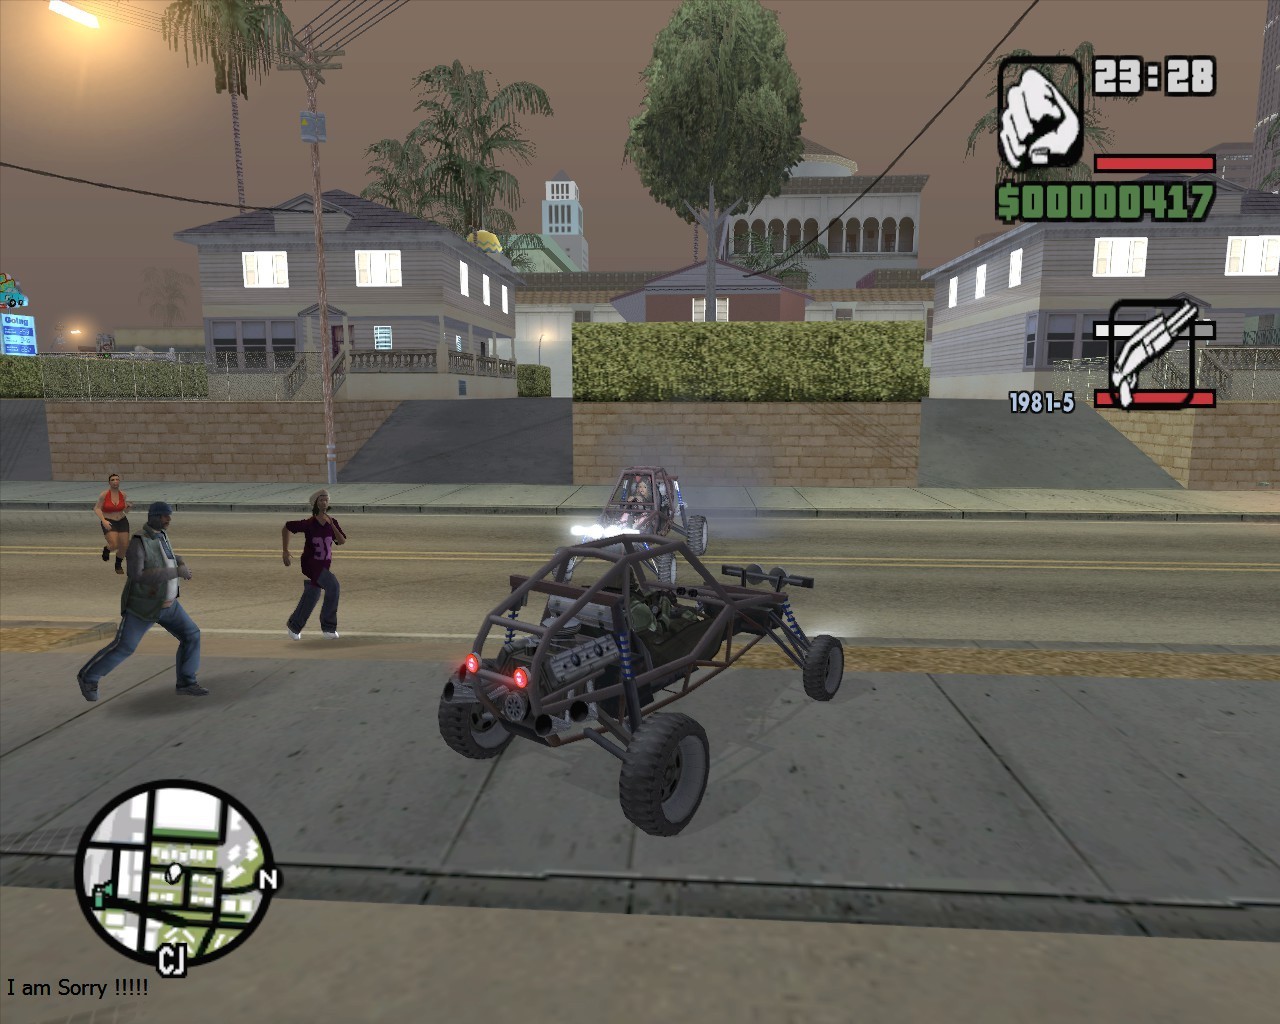 GTA San Andreas 2 Player Deluxe: What gamers should know about this local  multiplayer mod